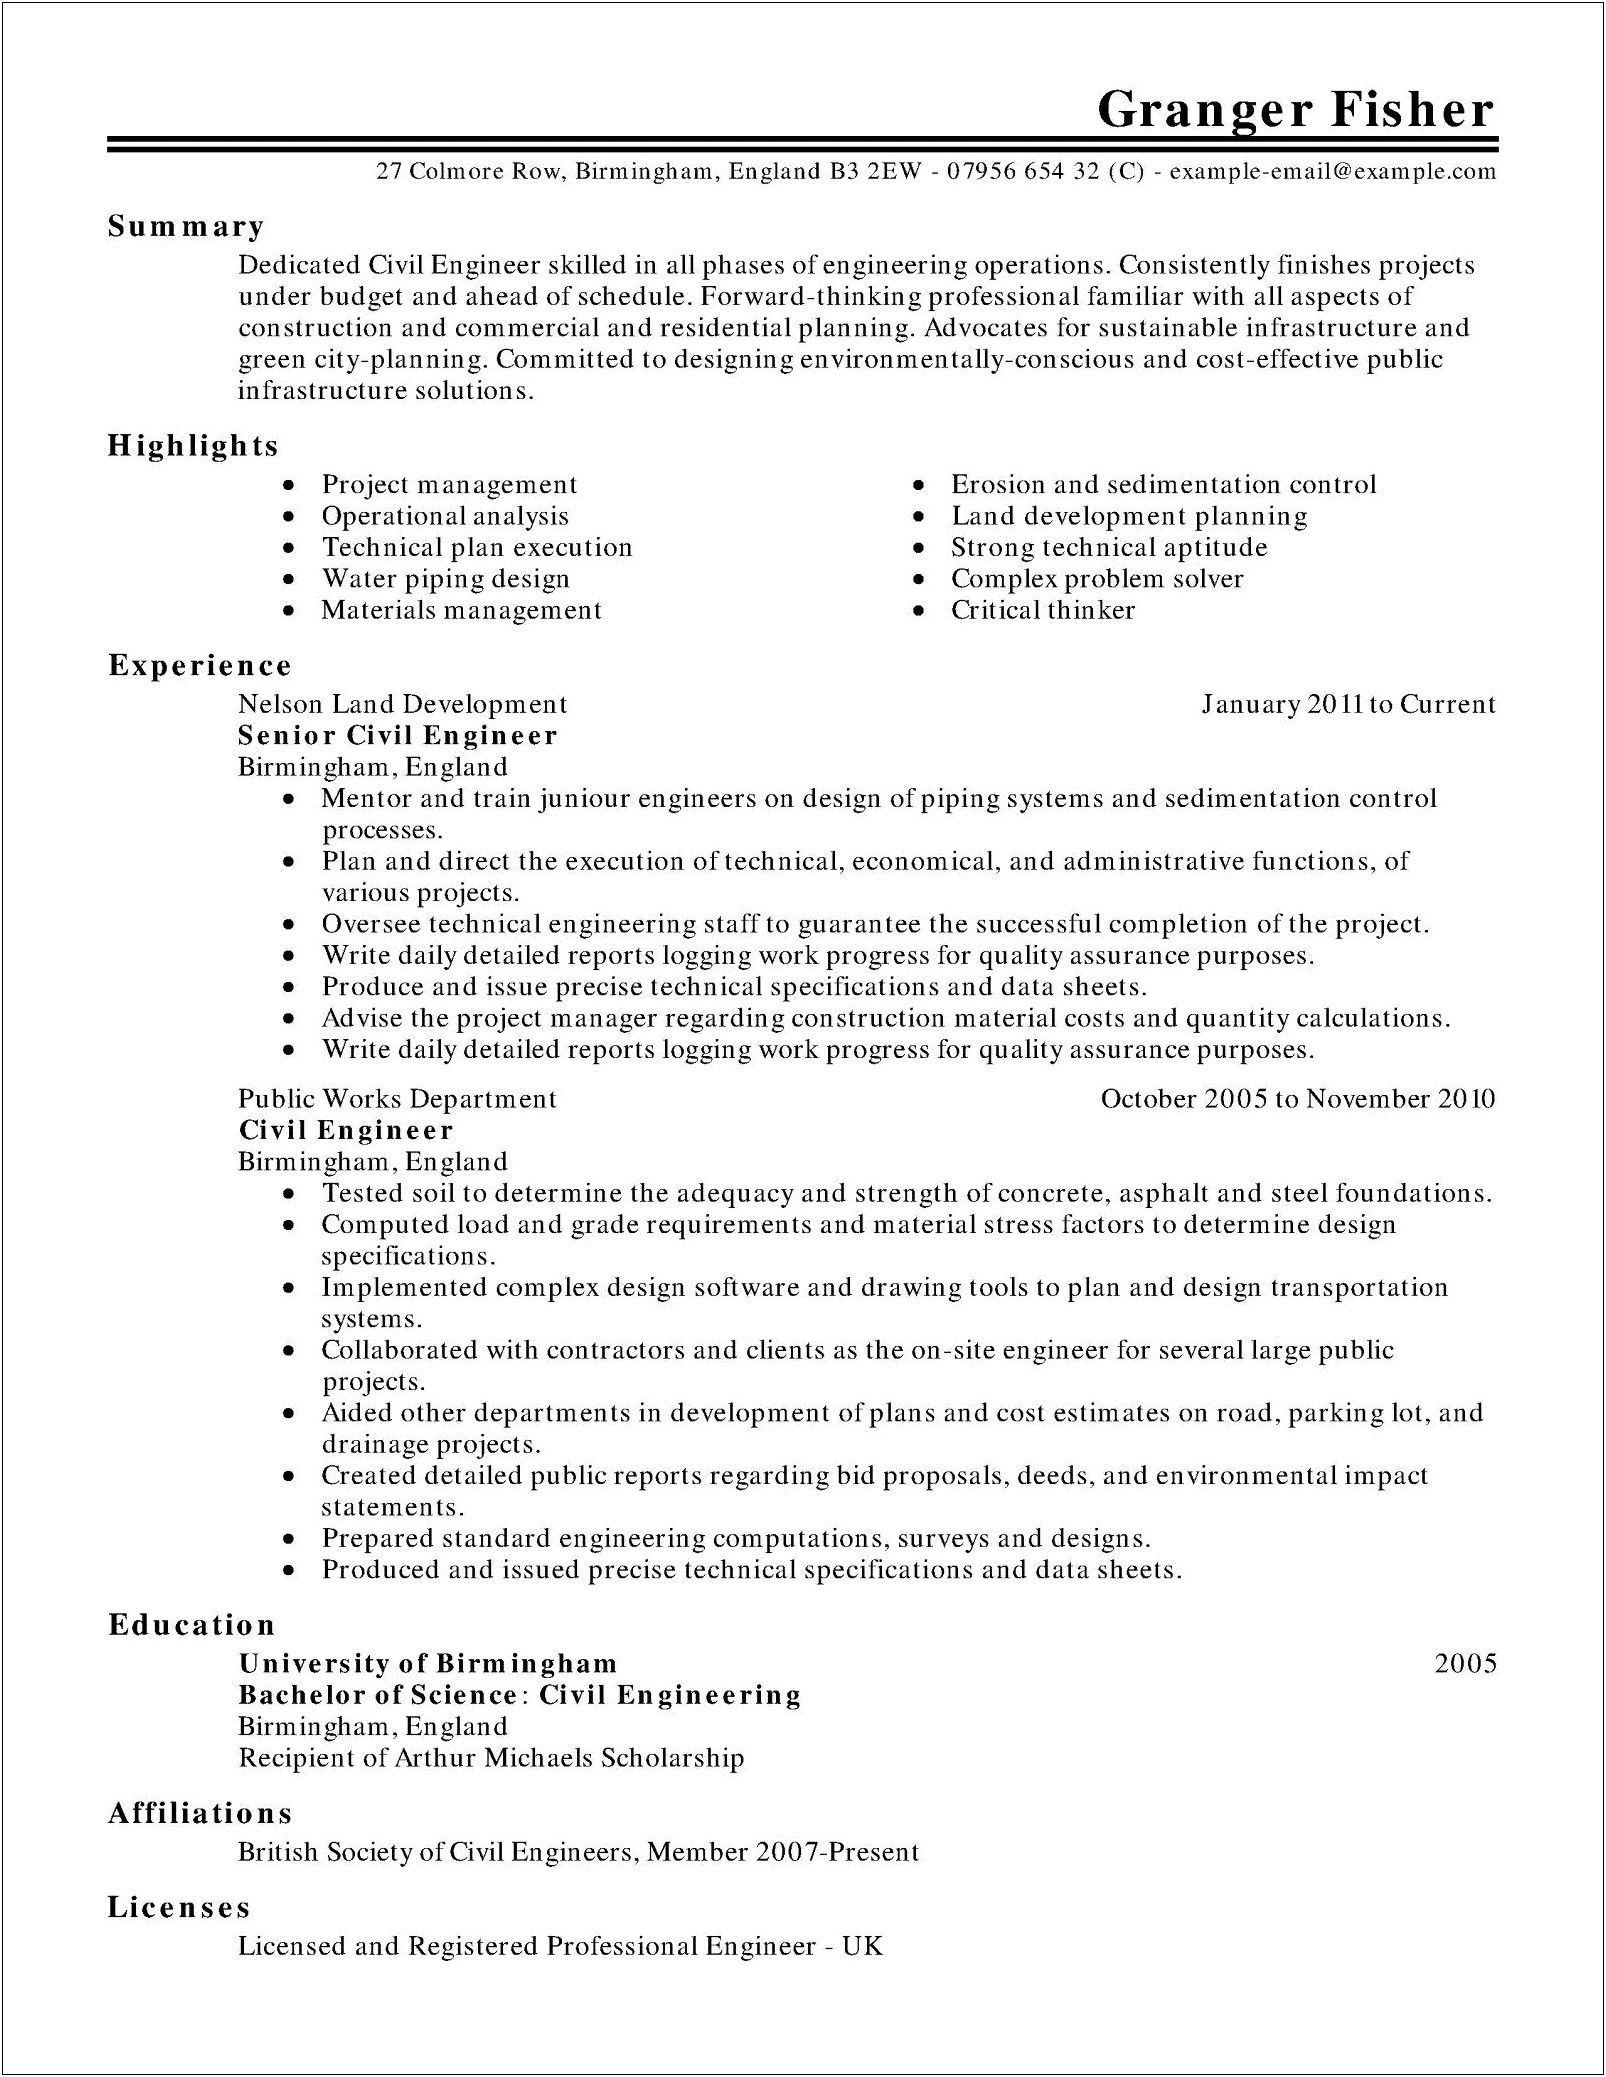 Resume Sample For Infrastructure Project Manager